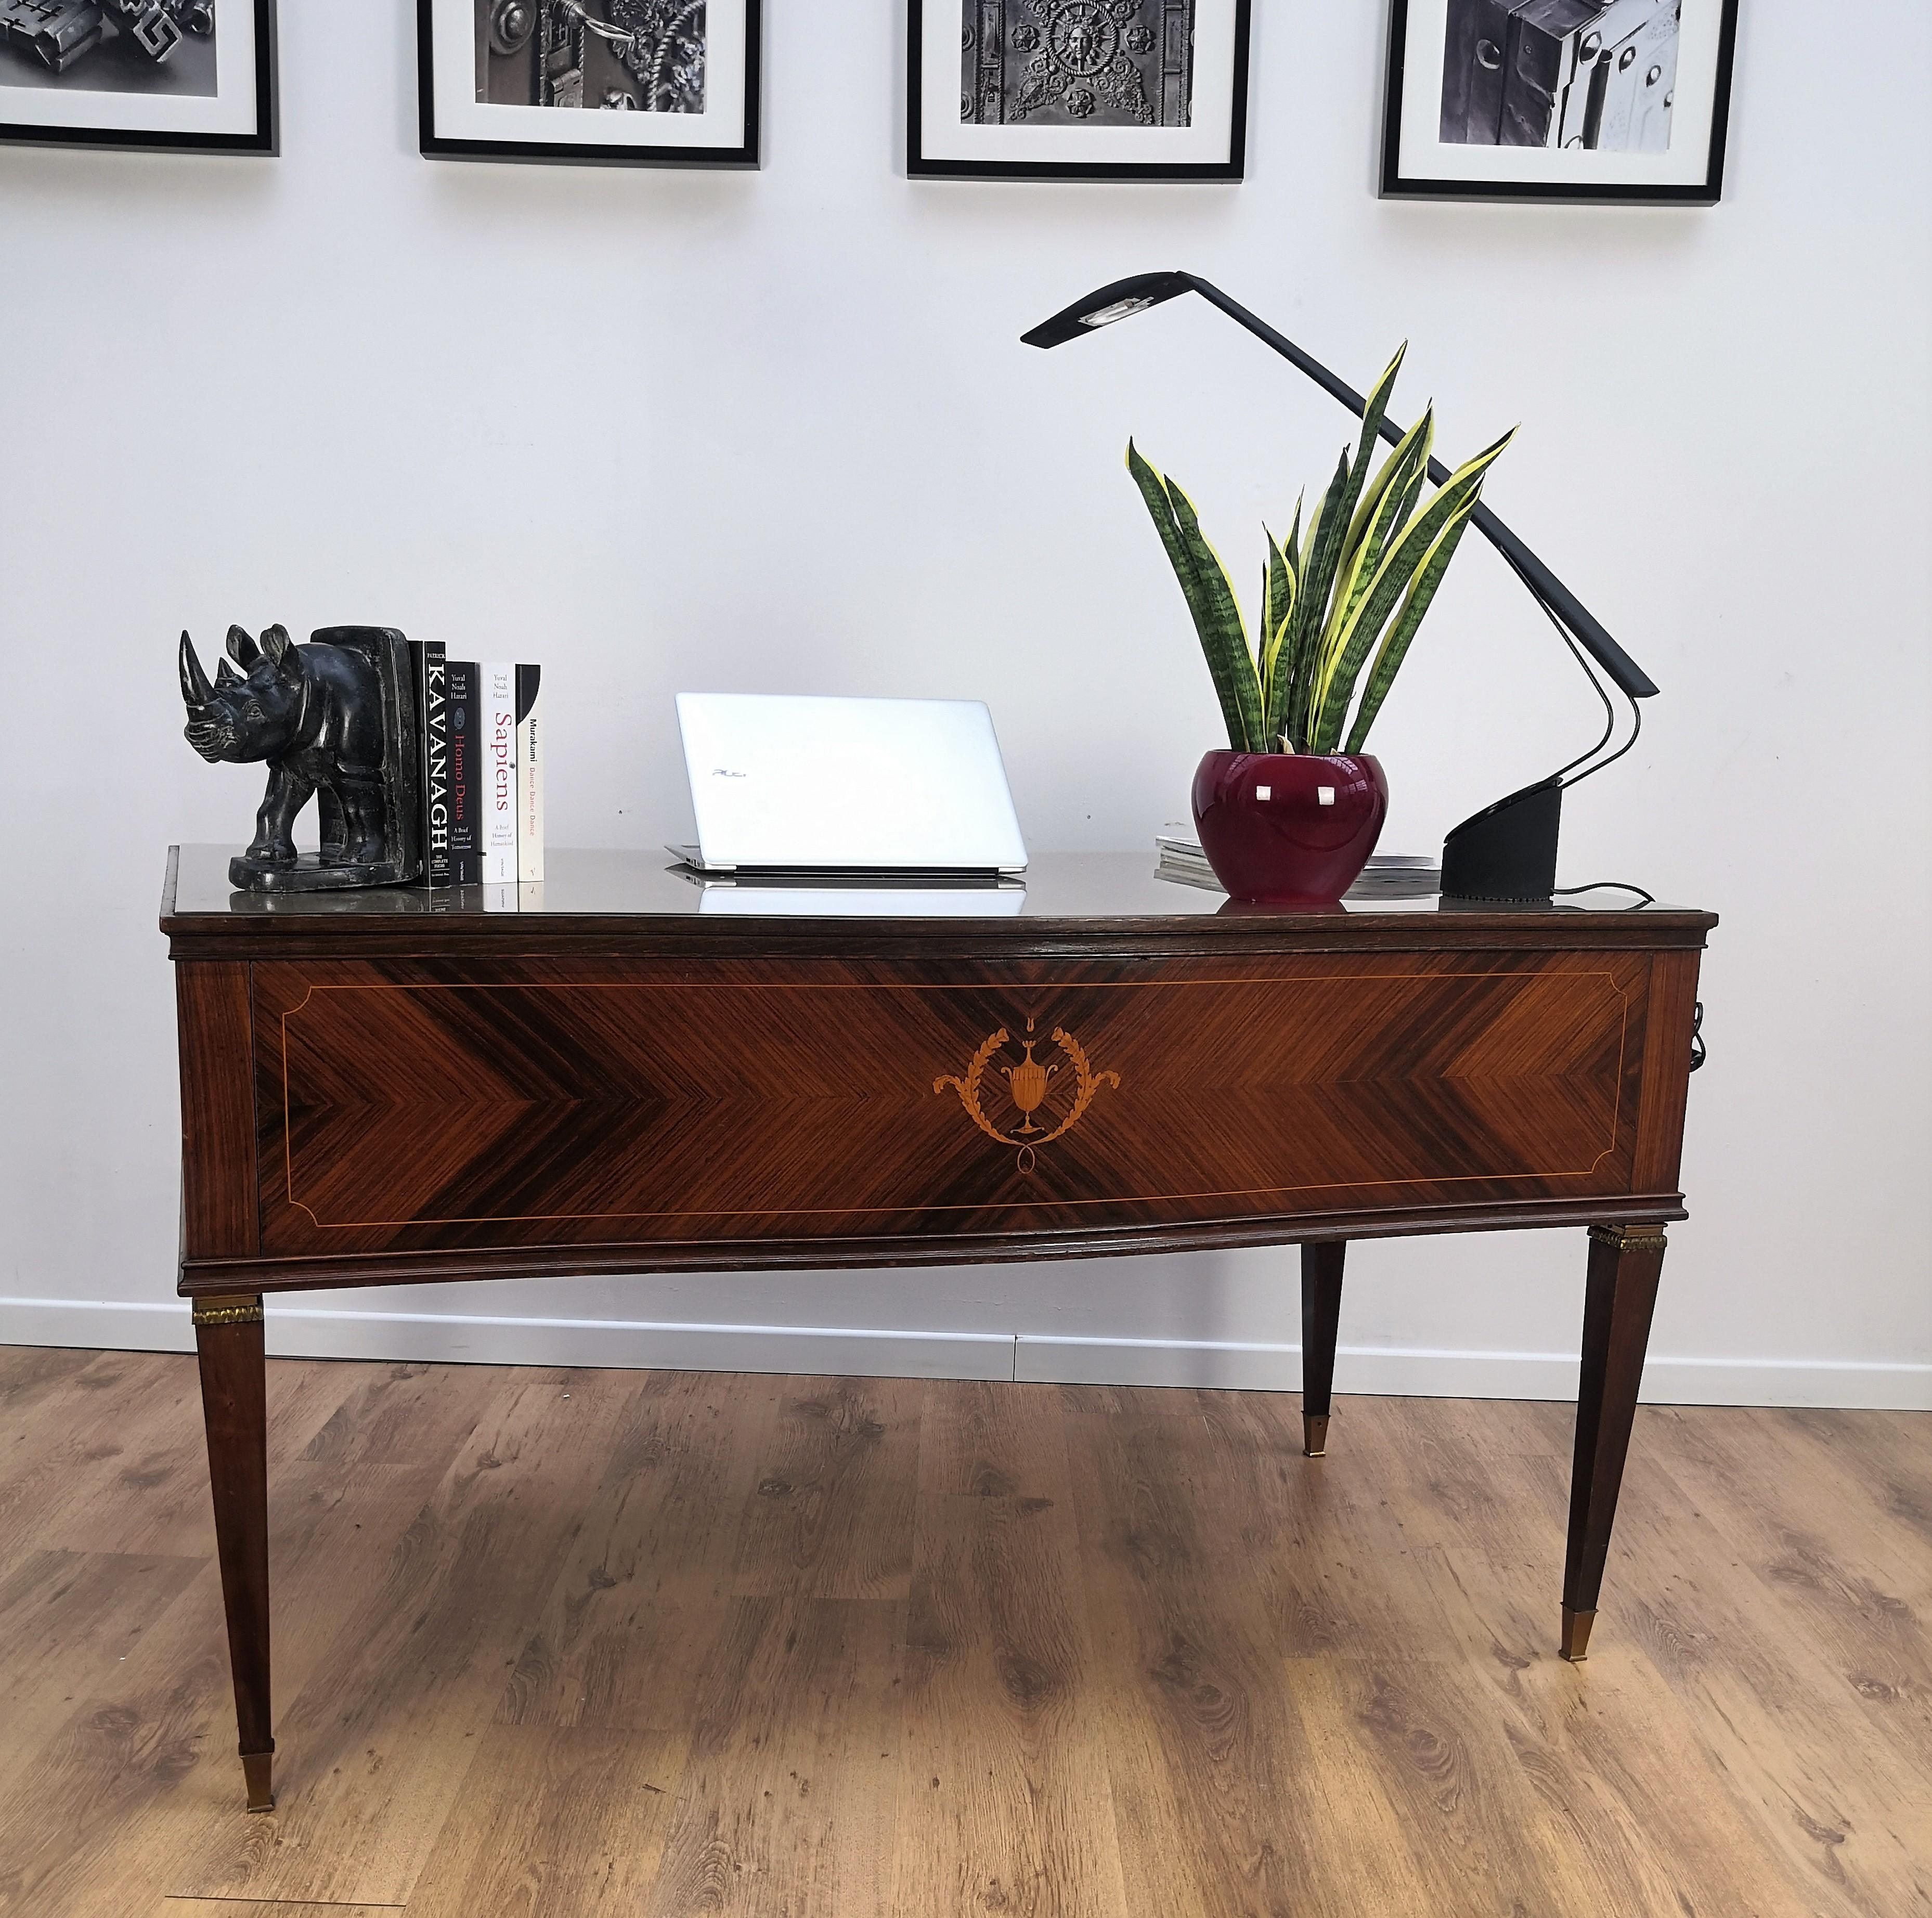 Beautiful Italian 1930s writing desk, bureau with elegant and classic wood worked according its natural graining, 4 drawers with gray/copper lacquered glass top and the final touch details of the original gilt brass handles and gilt brass feet on